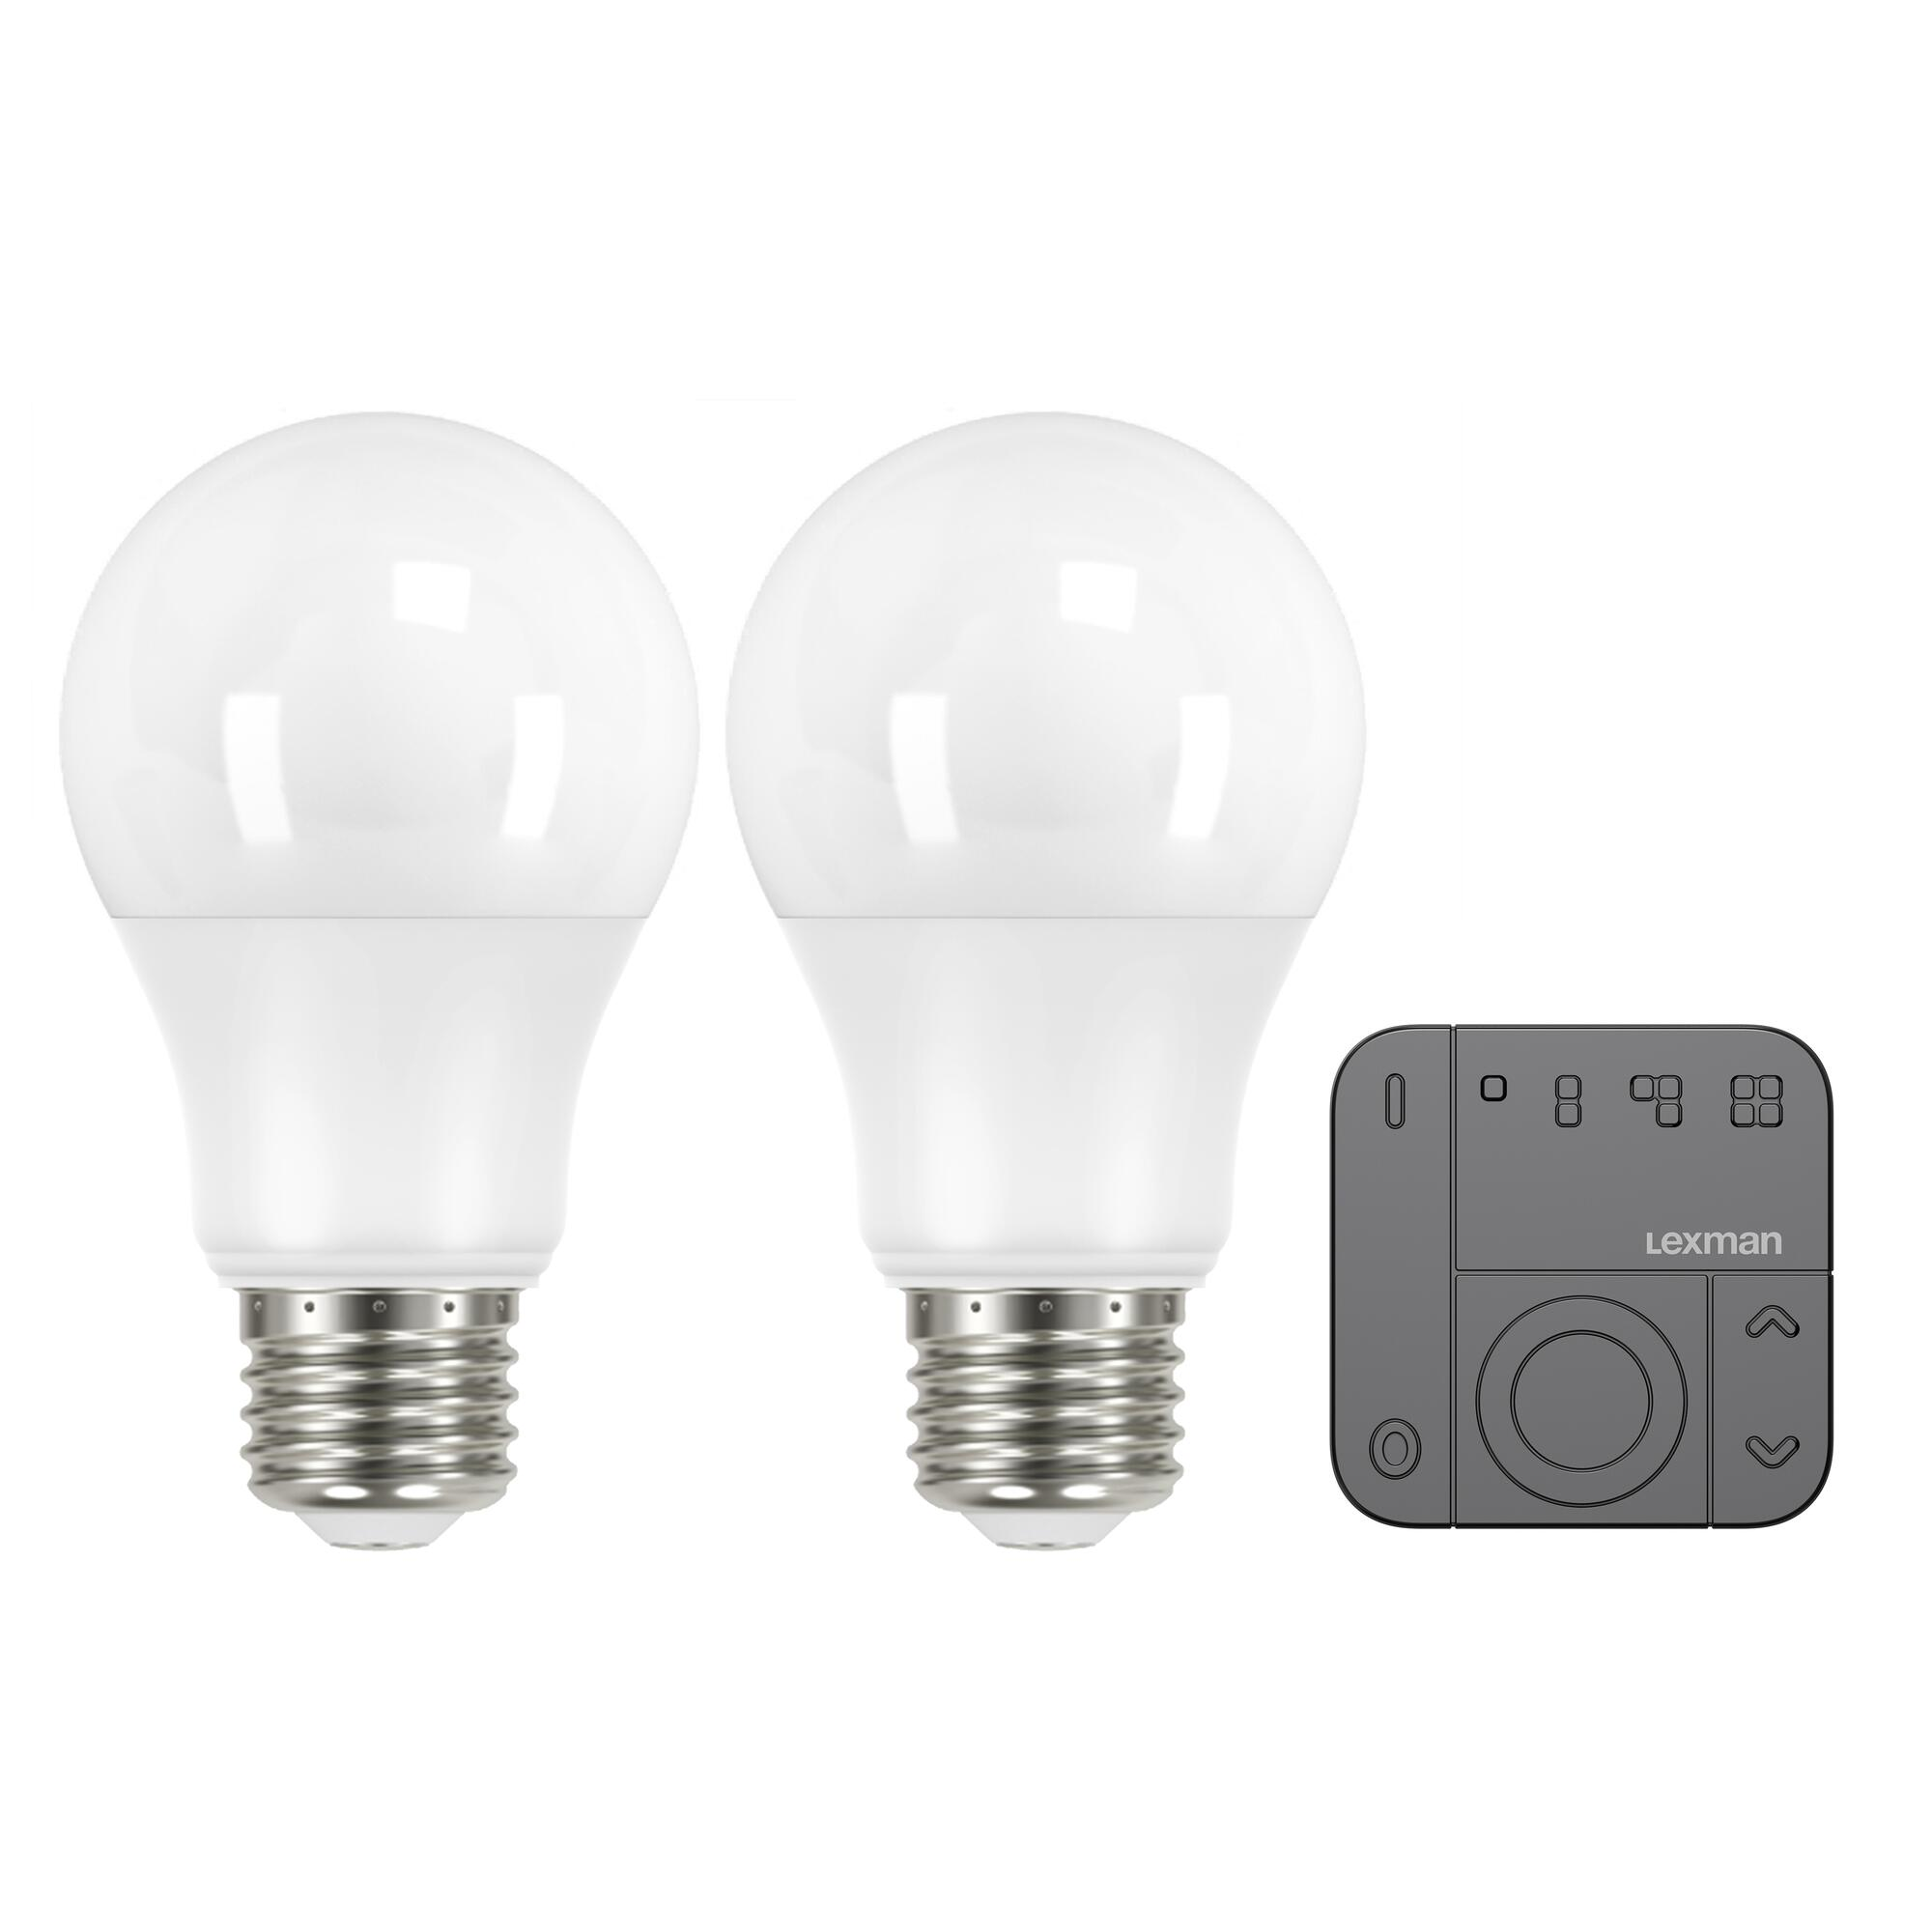 Philips Hue Ampoule White E14 Lustre pack individuel 470 lm